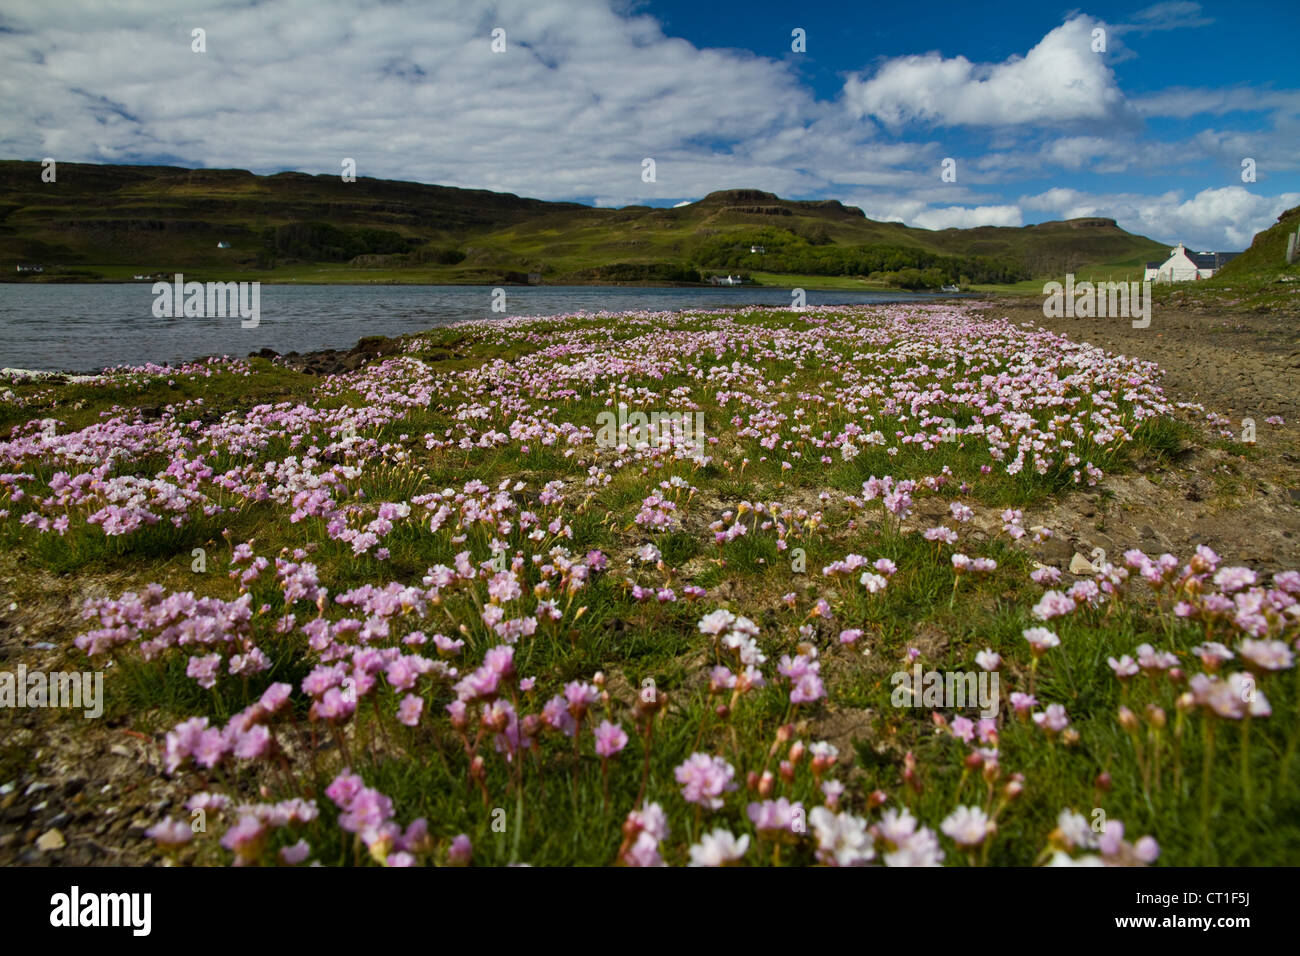 Sea pink or thrift (Armeria maritima) carpets the shore of the bay on Sanday, Isle of Canna, Small Isles, Scotland Stock Photo